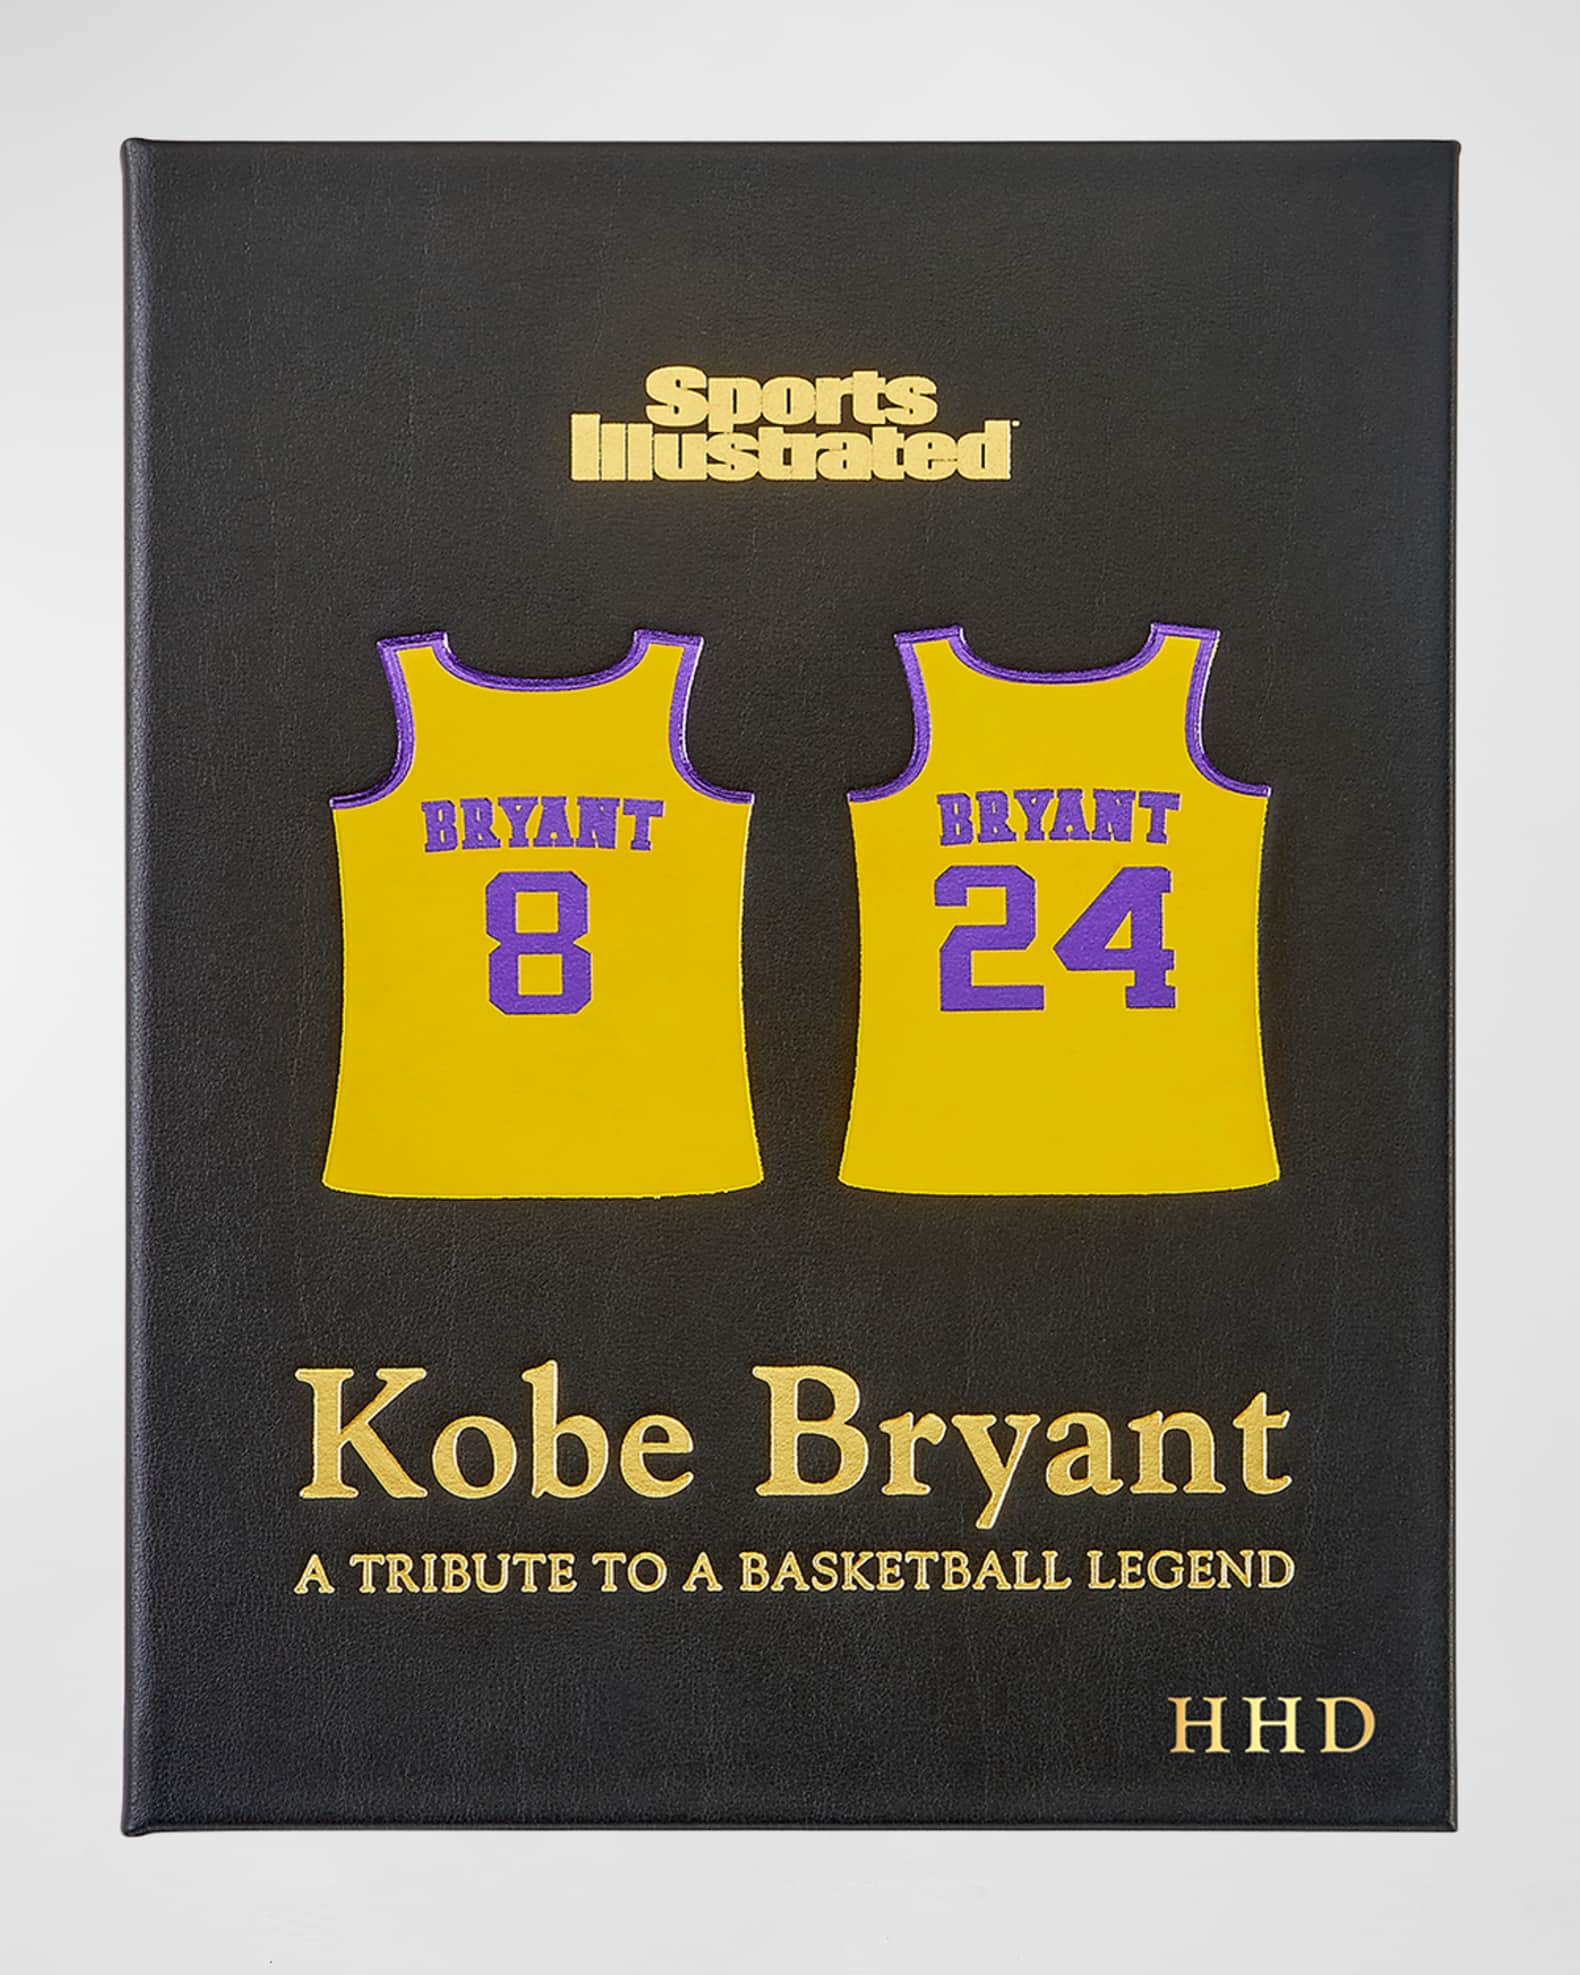 Kobe Bryant -- 15 iconic images of the Lakers legend from the